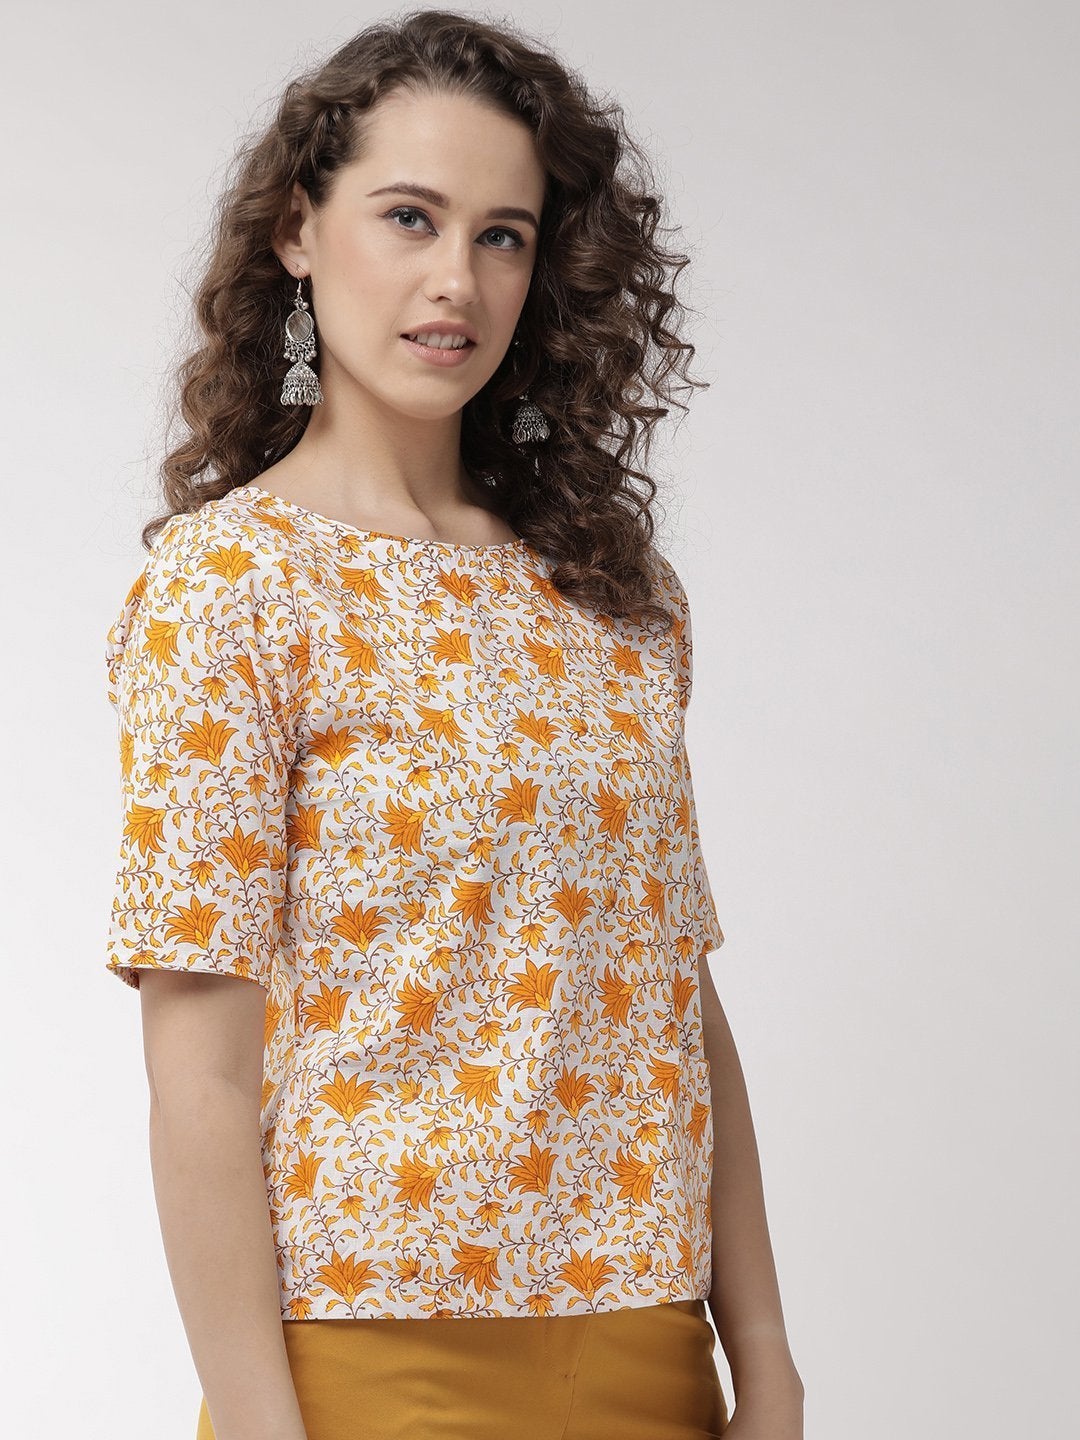 Women's White And Yellow Floral Top - InWeave